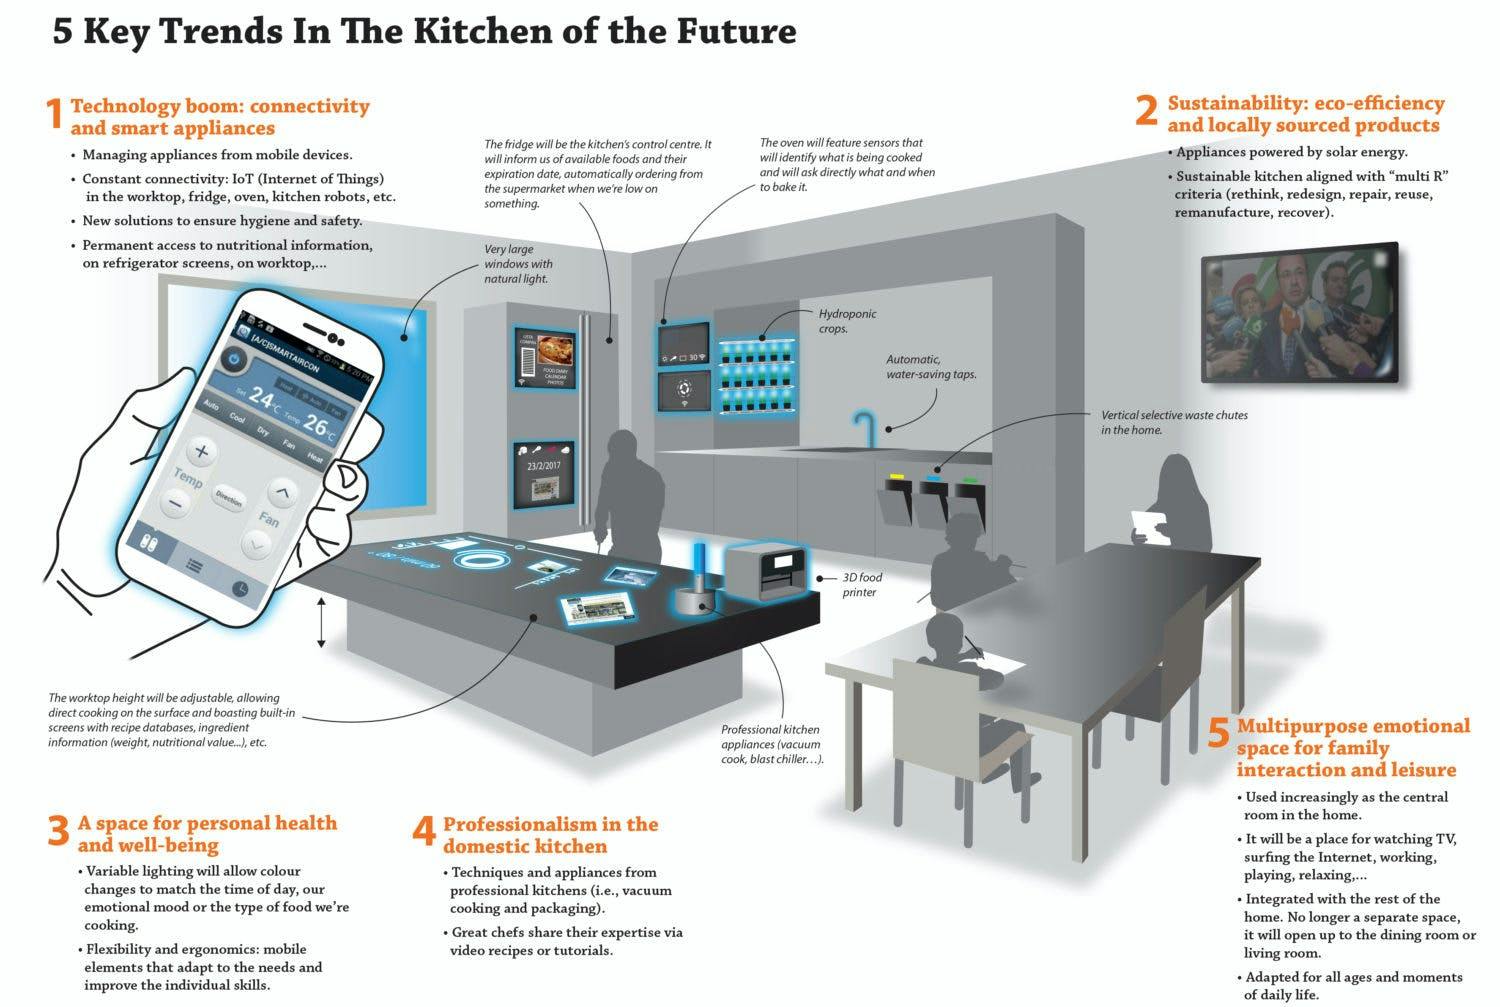 The kitchen of the future, a multifunctional, hyperconnected and health-focused space